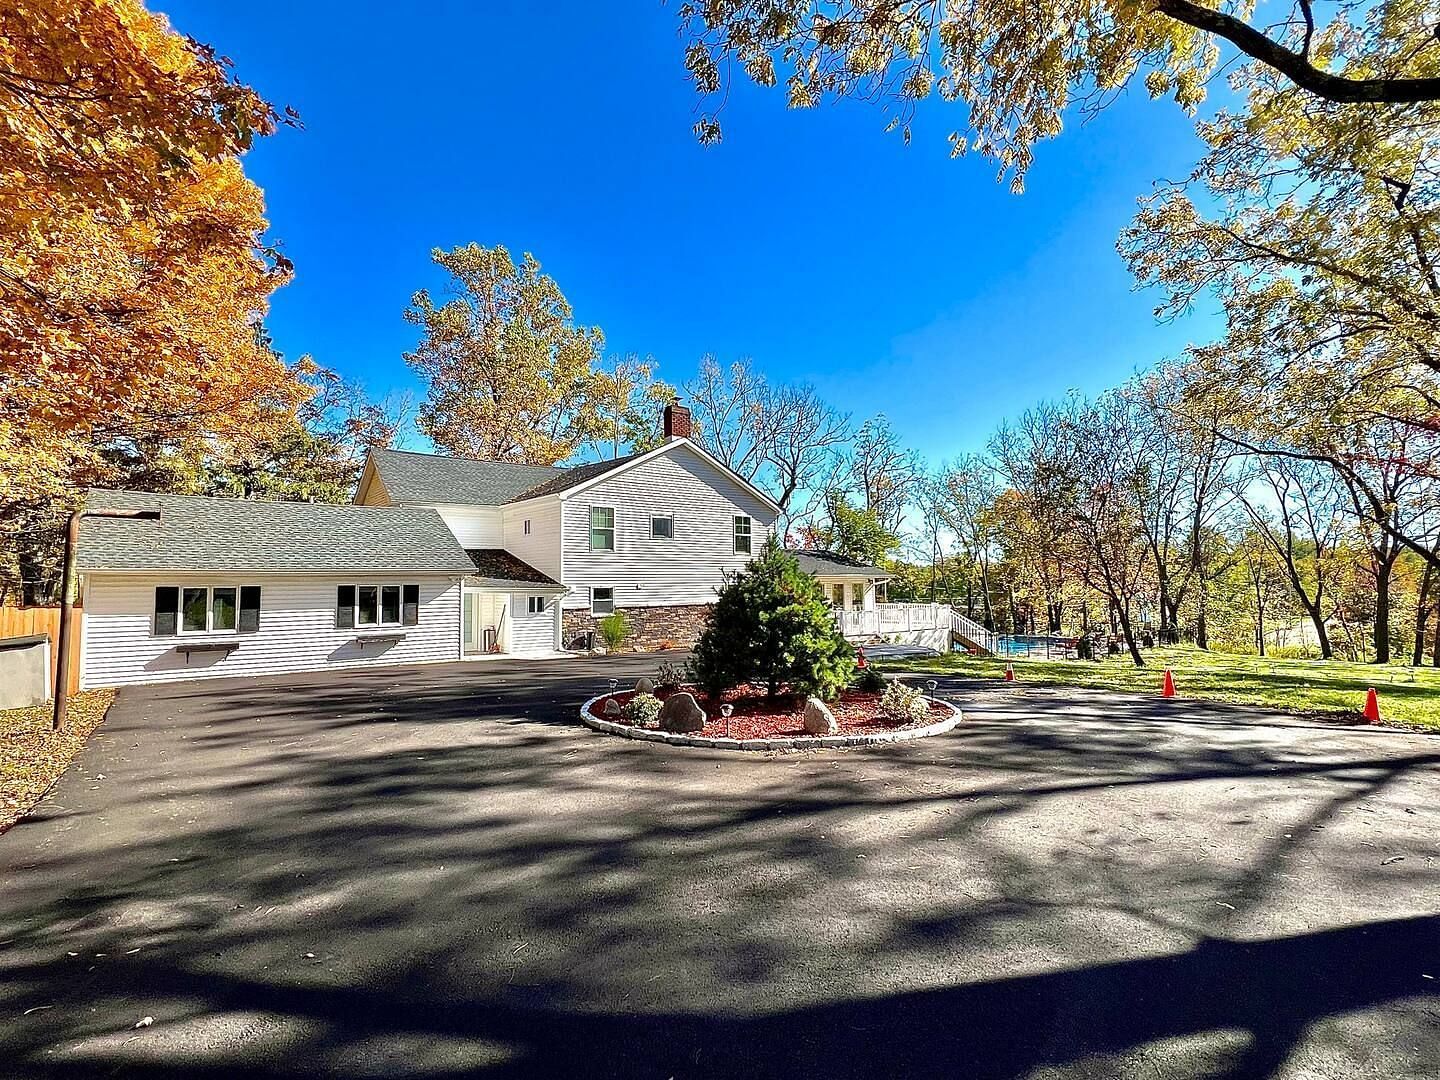 JWguest Cottage at Pine Bush, New York | Beautiful country house with game room and pool near Bethel | Jwbnb no brobnb 1